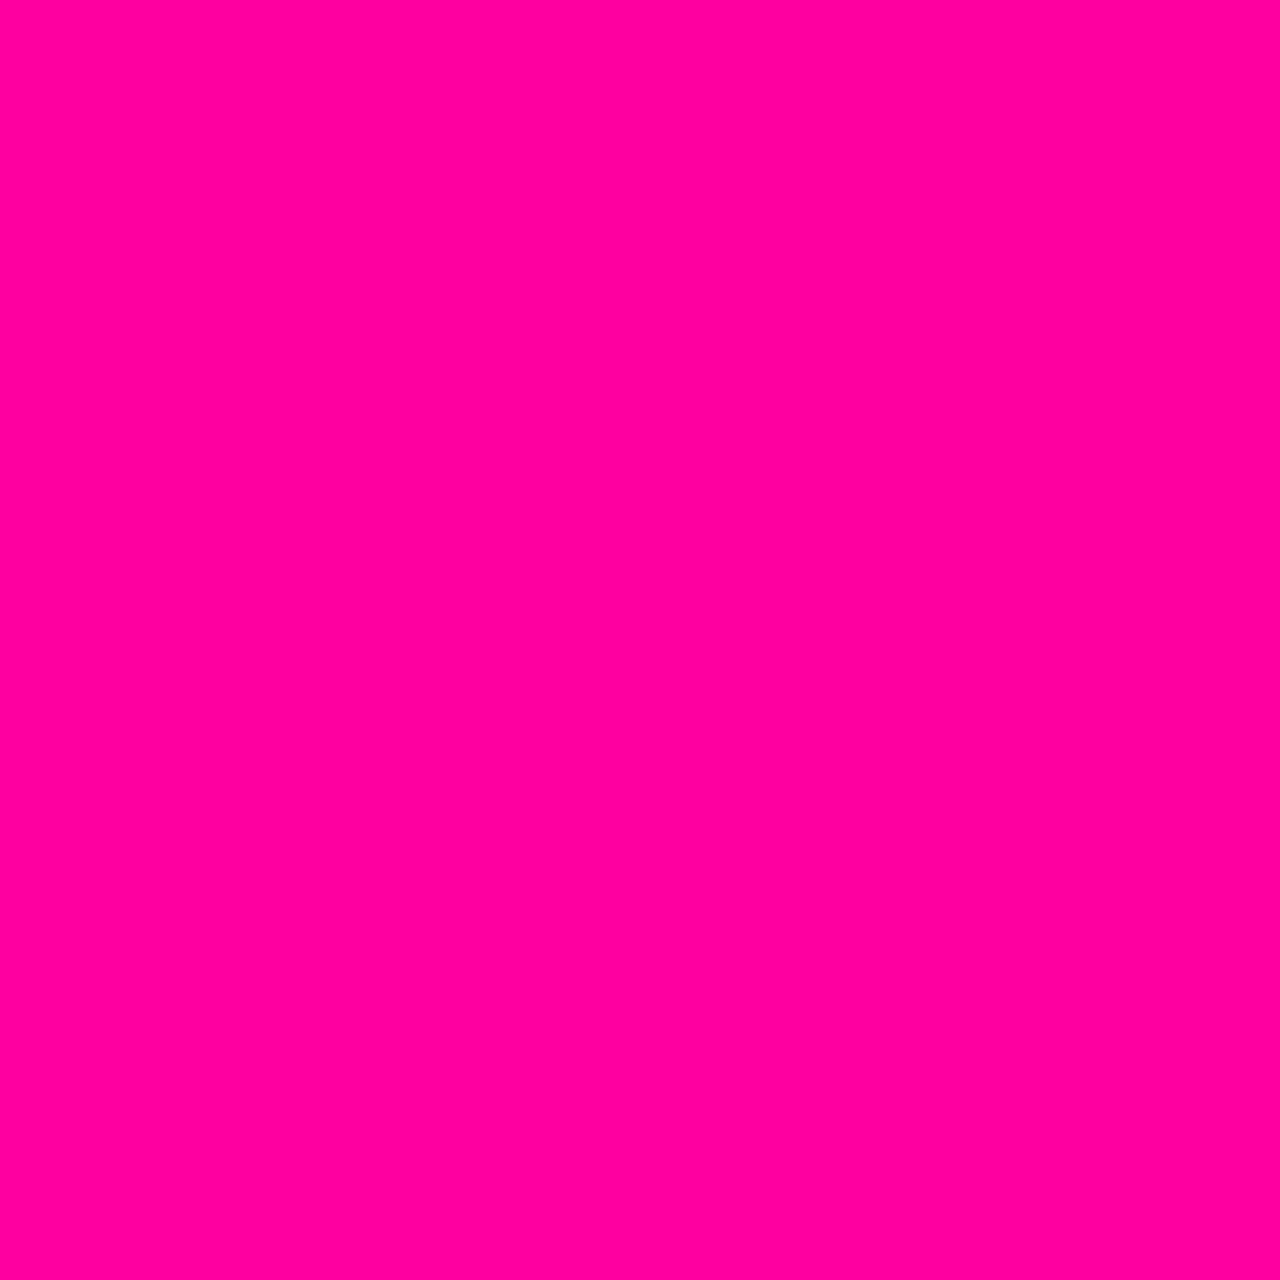 Neon Pink Puff Heat Transfer Vinyl Sheets By Craftables